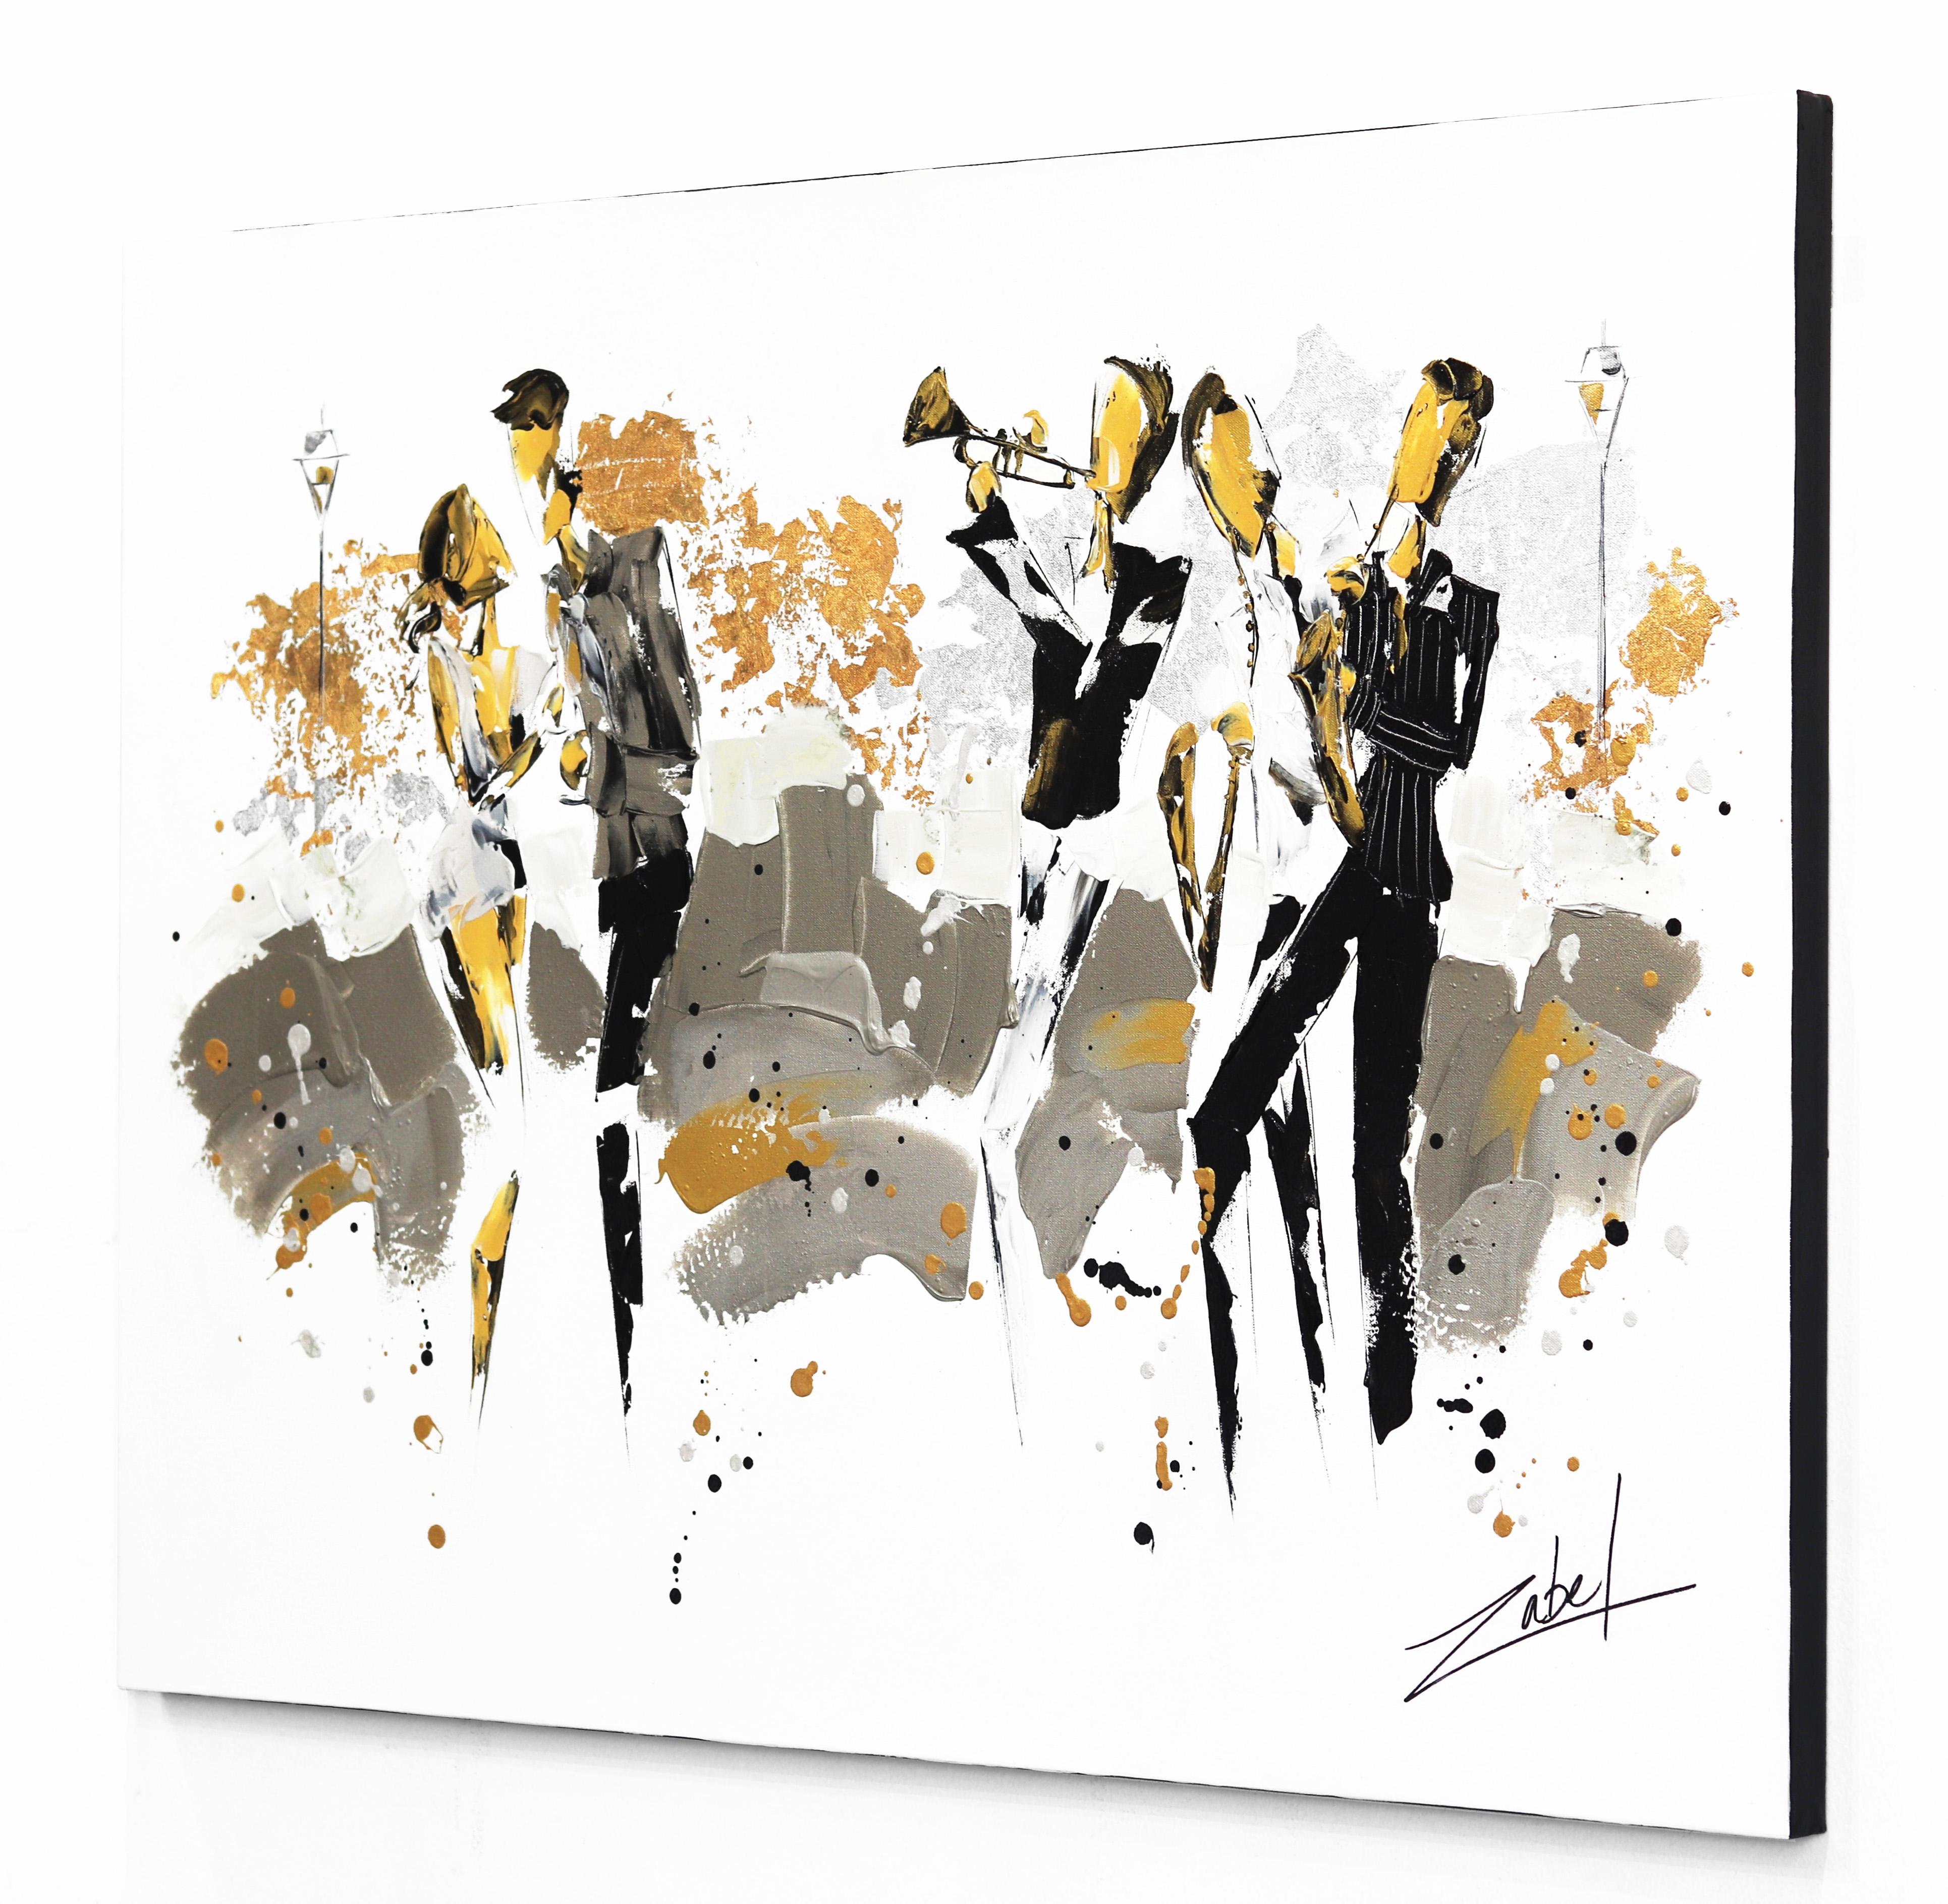 Jazz and Champagne in NOLA - Figurative Vibrant Modern Love Original Painting 1